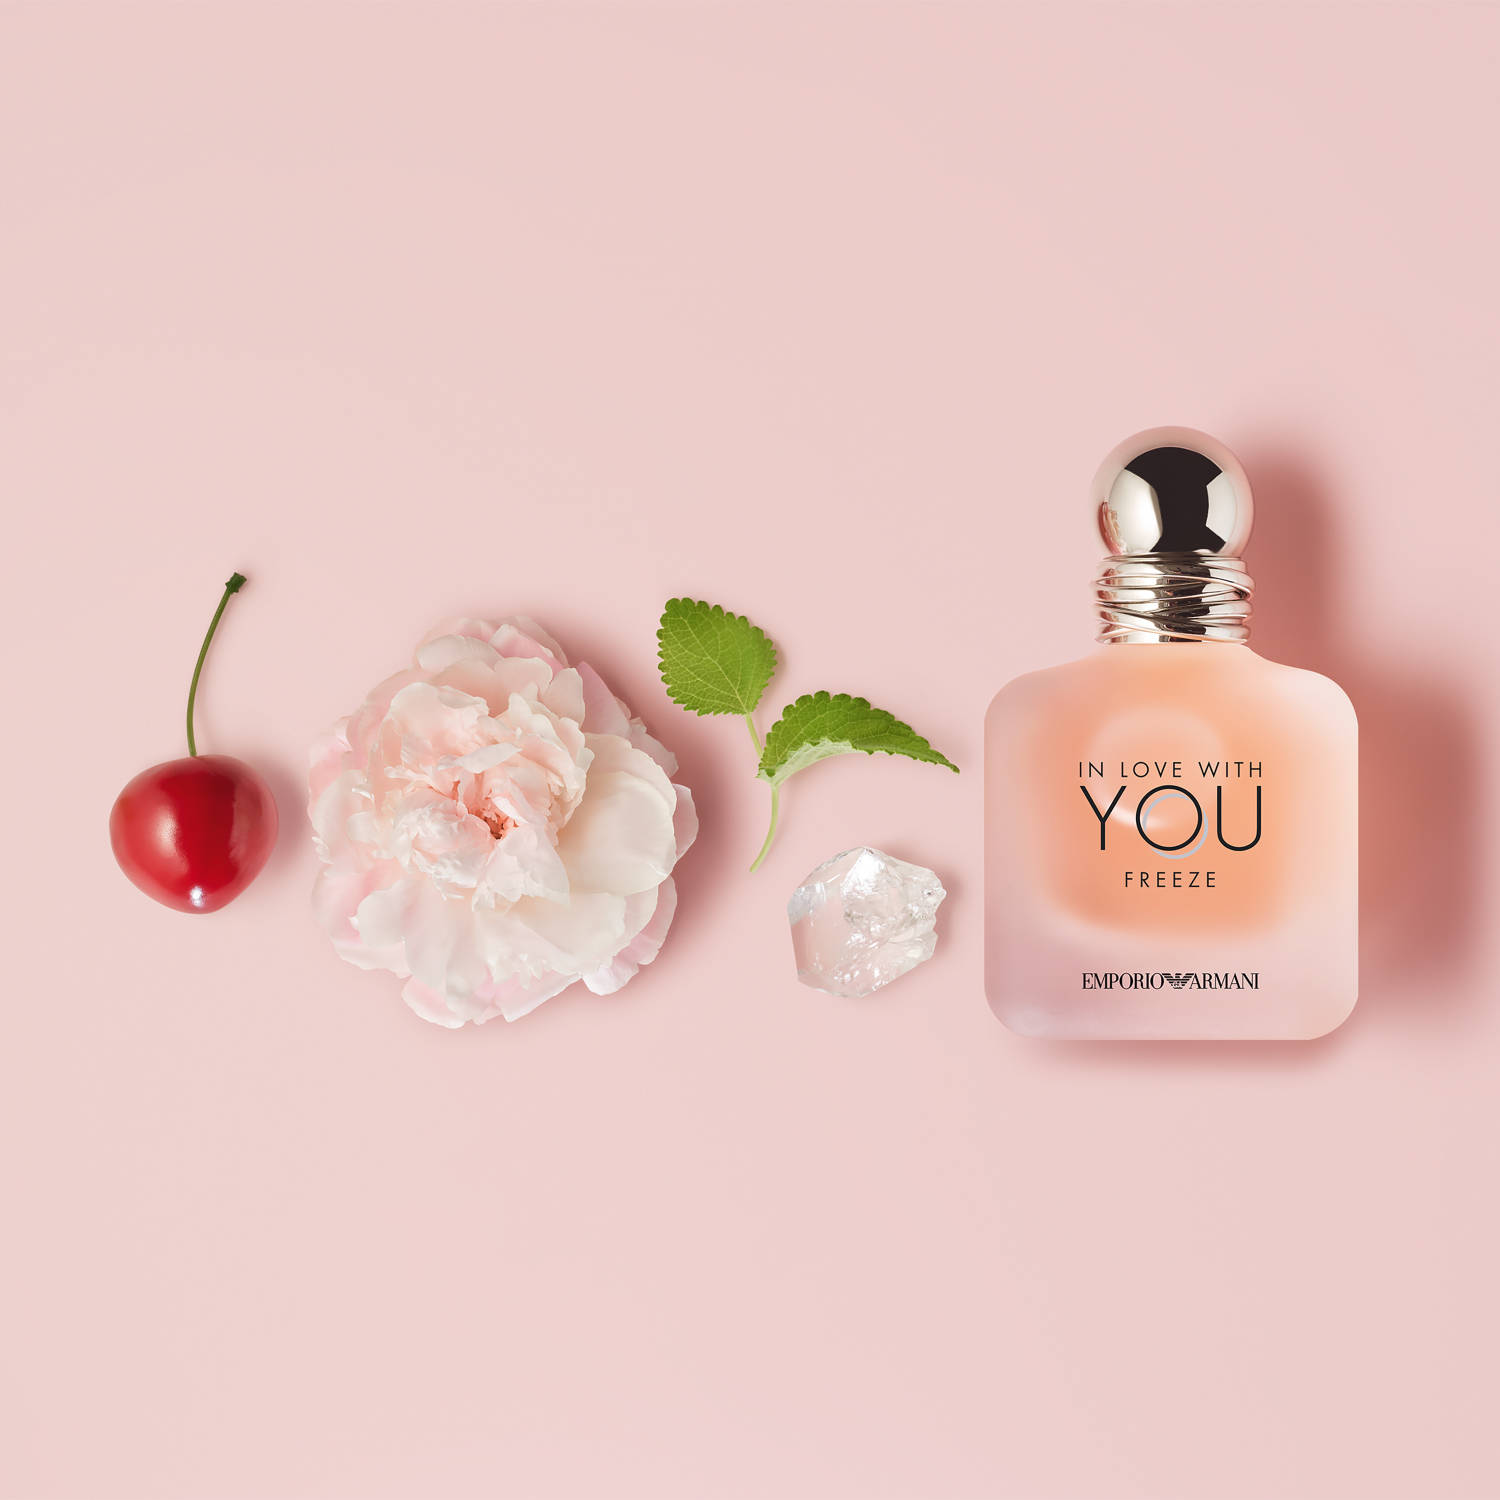 armani in love with you review